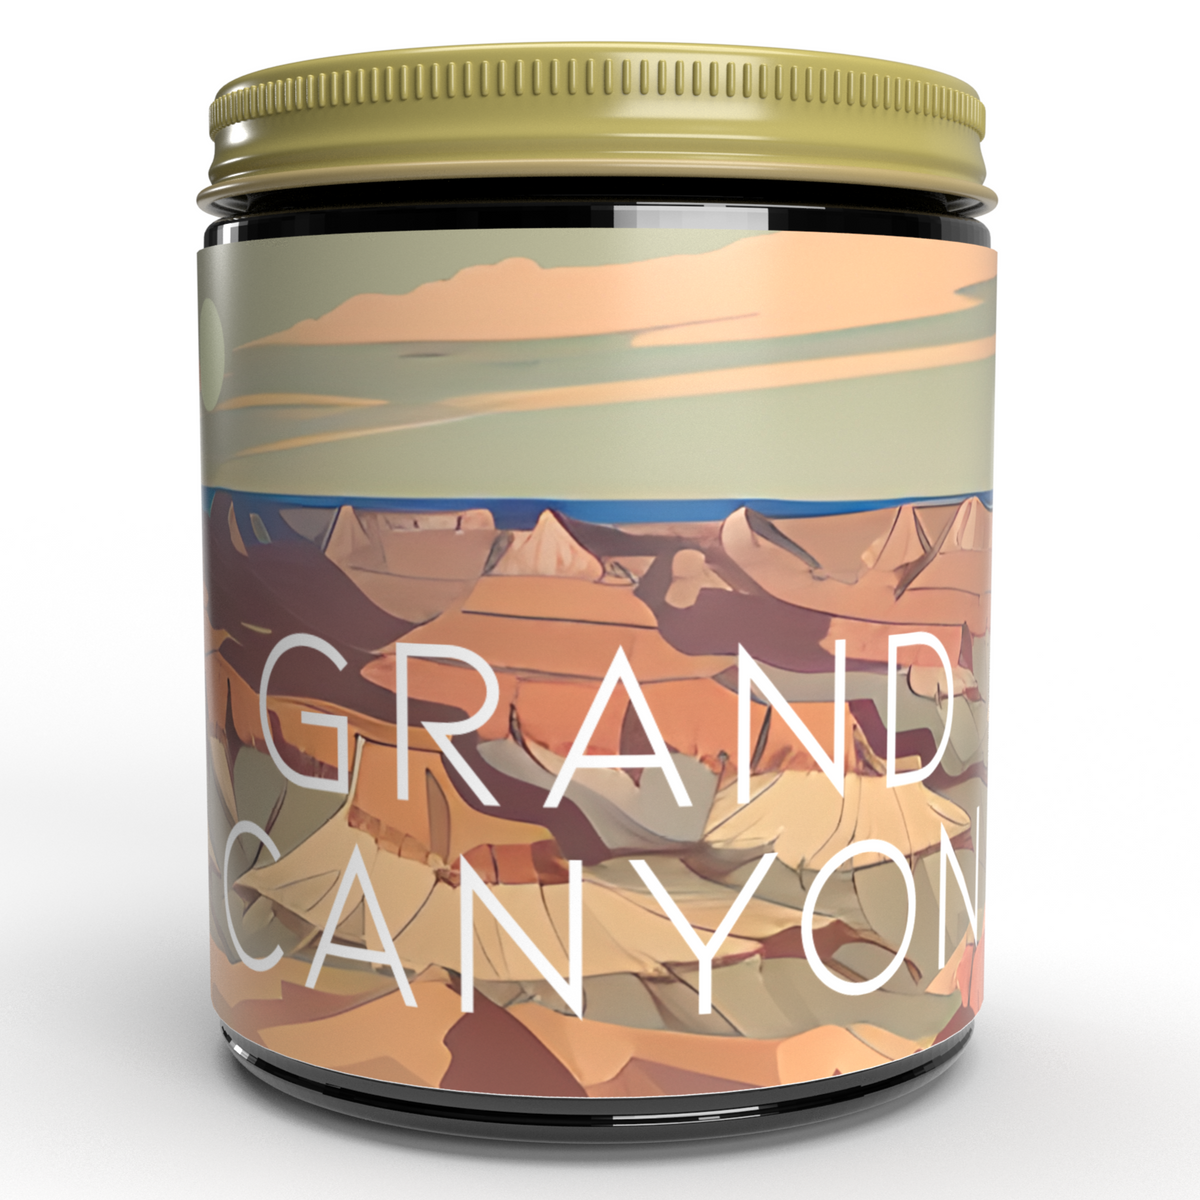 Grand Canyon National Park Soy Wax Candle - 9oz